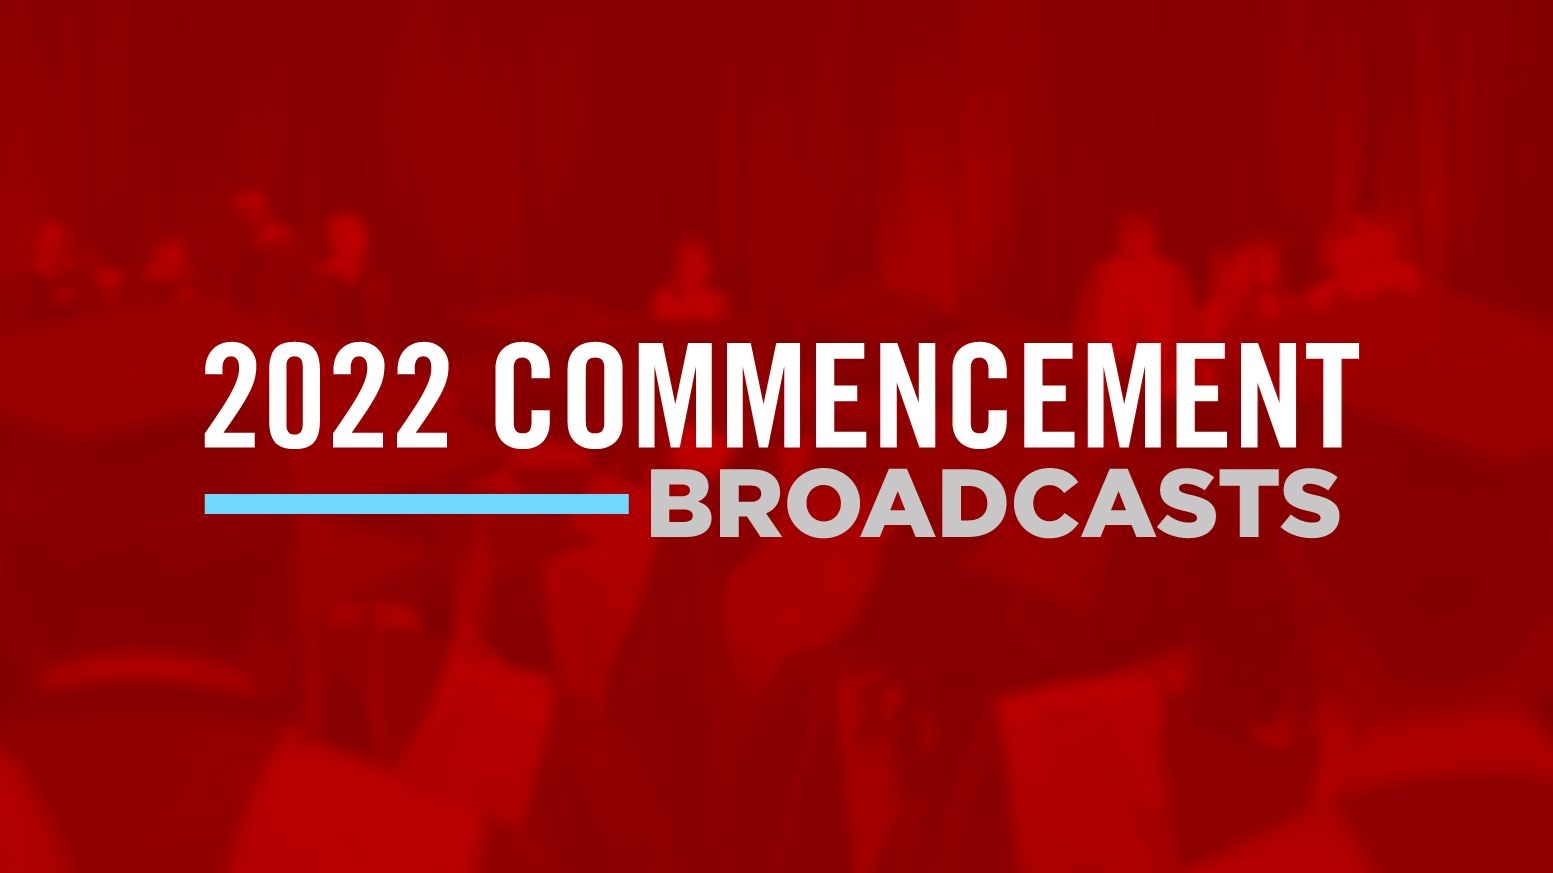 2022 Commencement Broadcasts